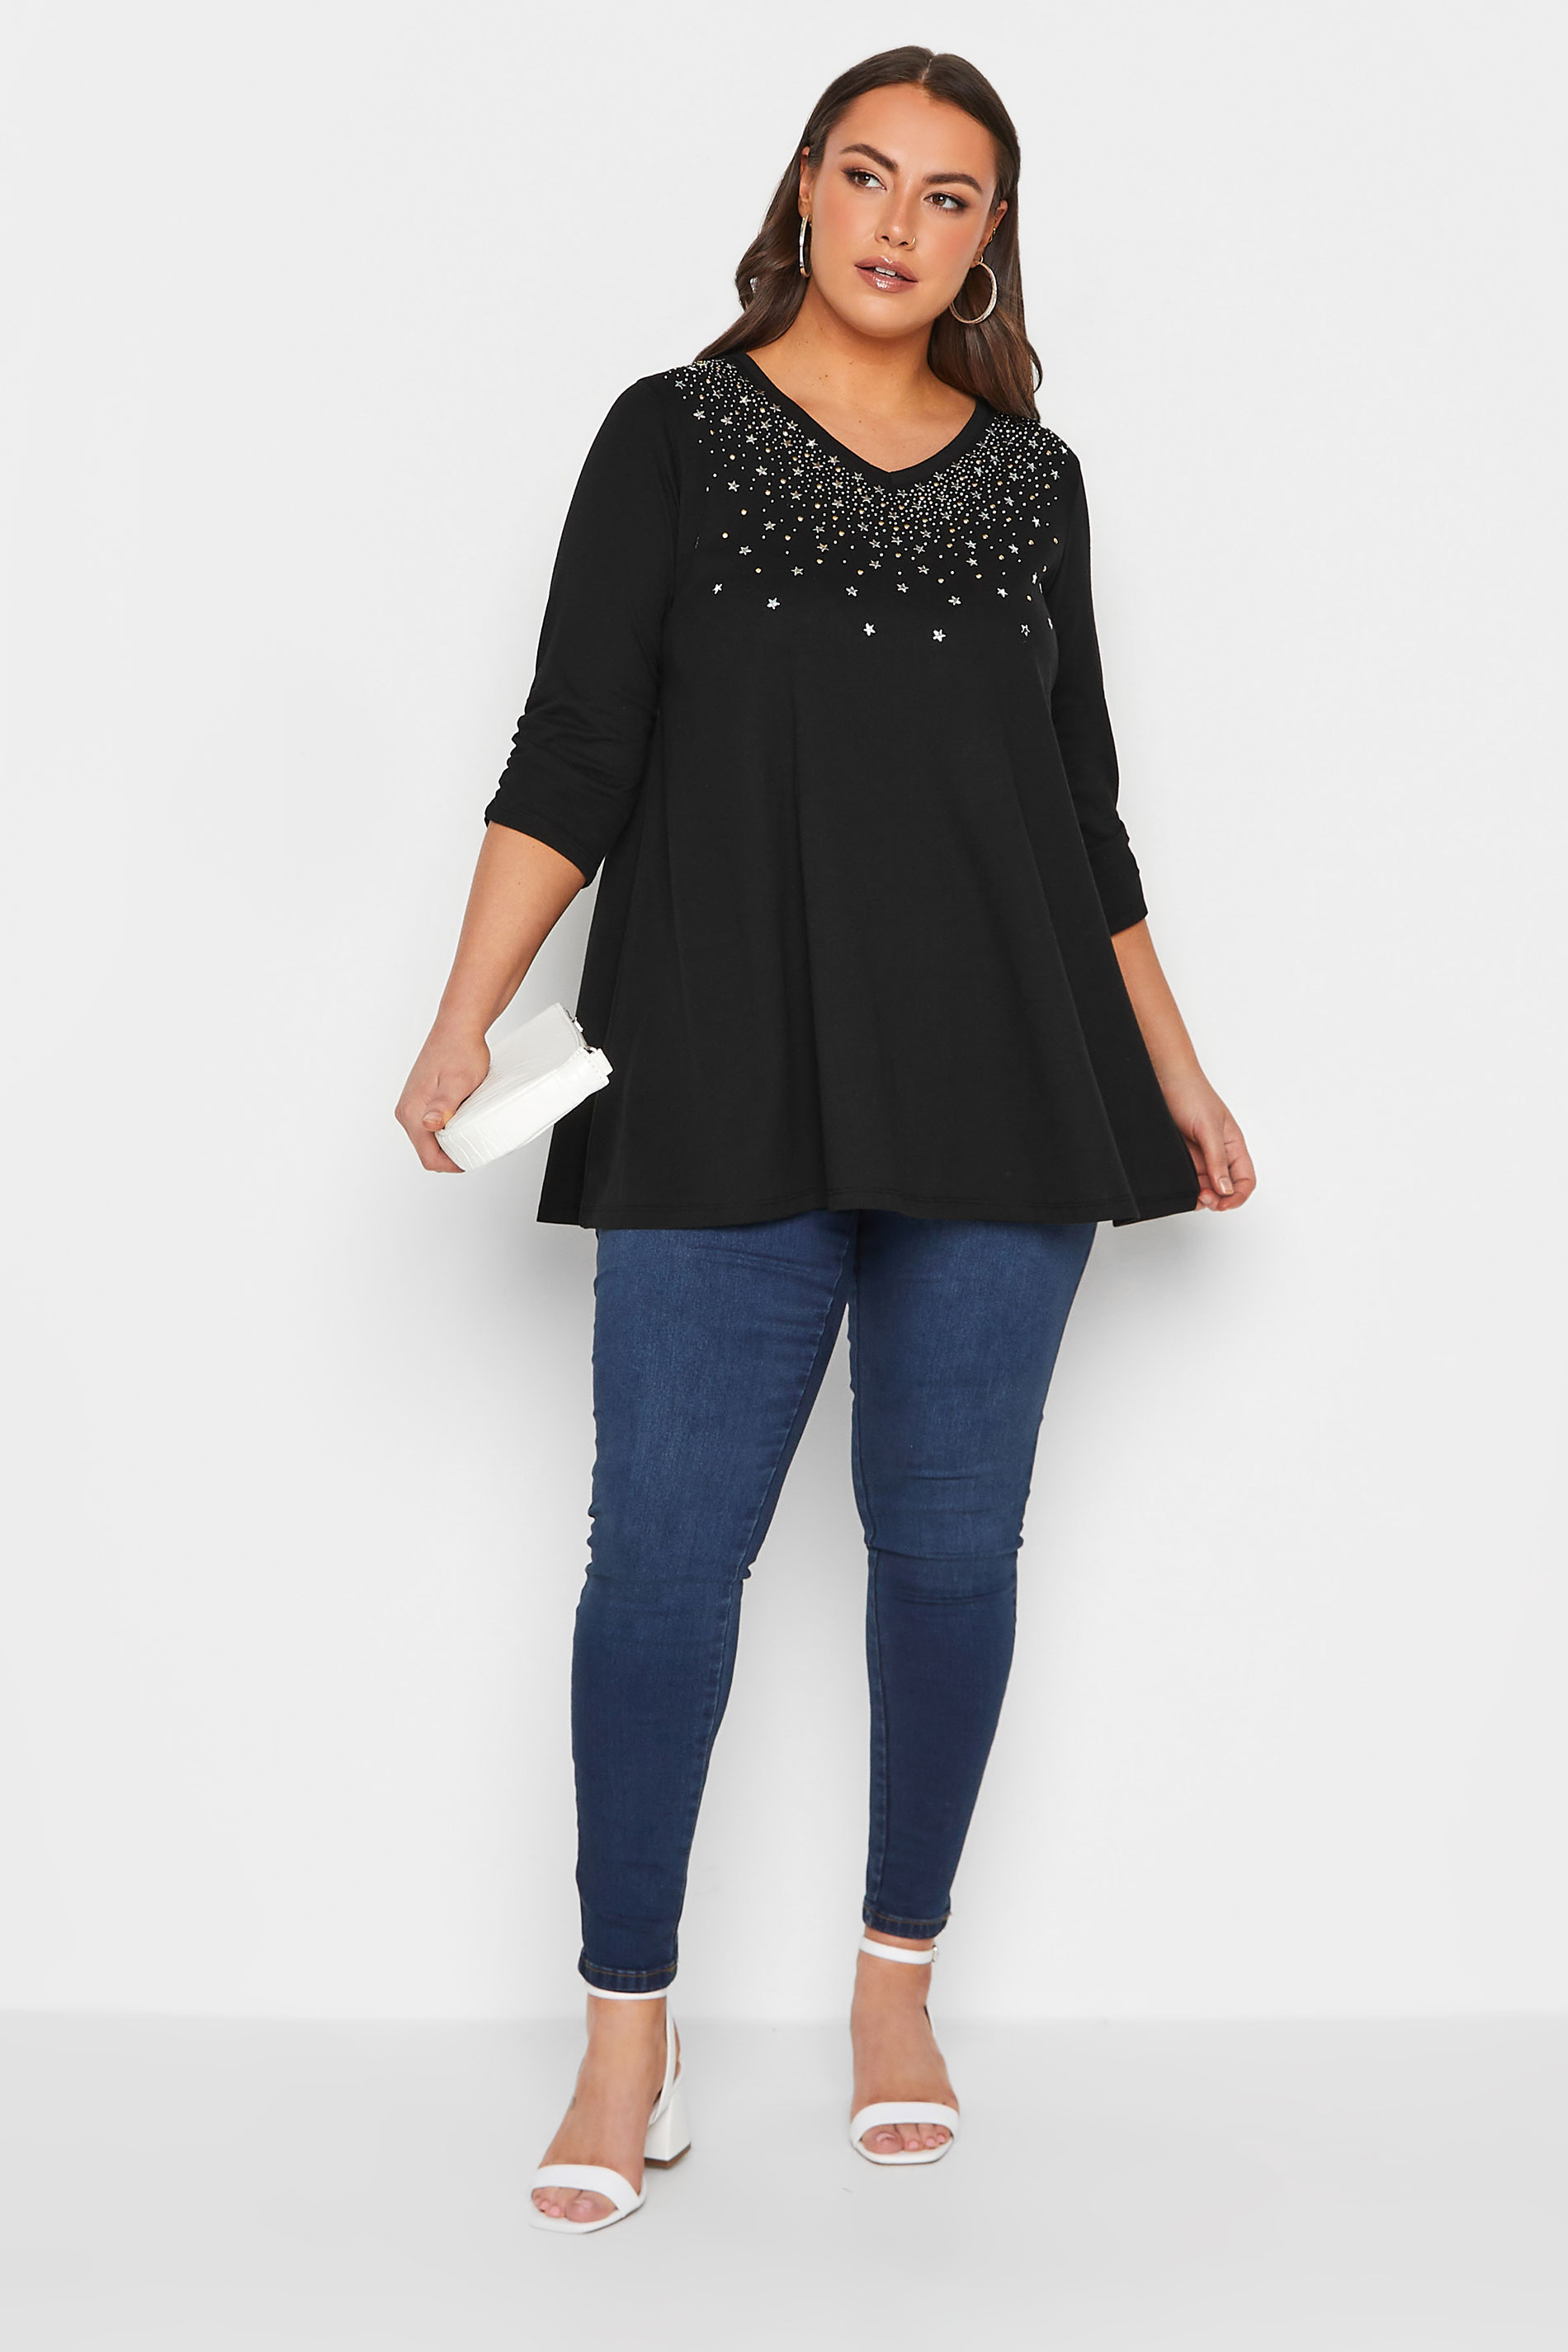 YOURS Curve Black Star Embellished Top | Yours Clothing 2